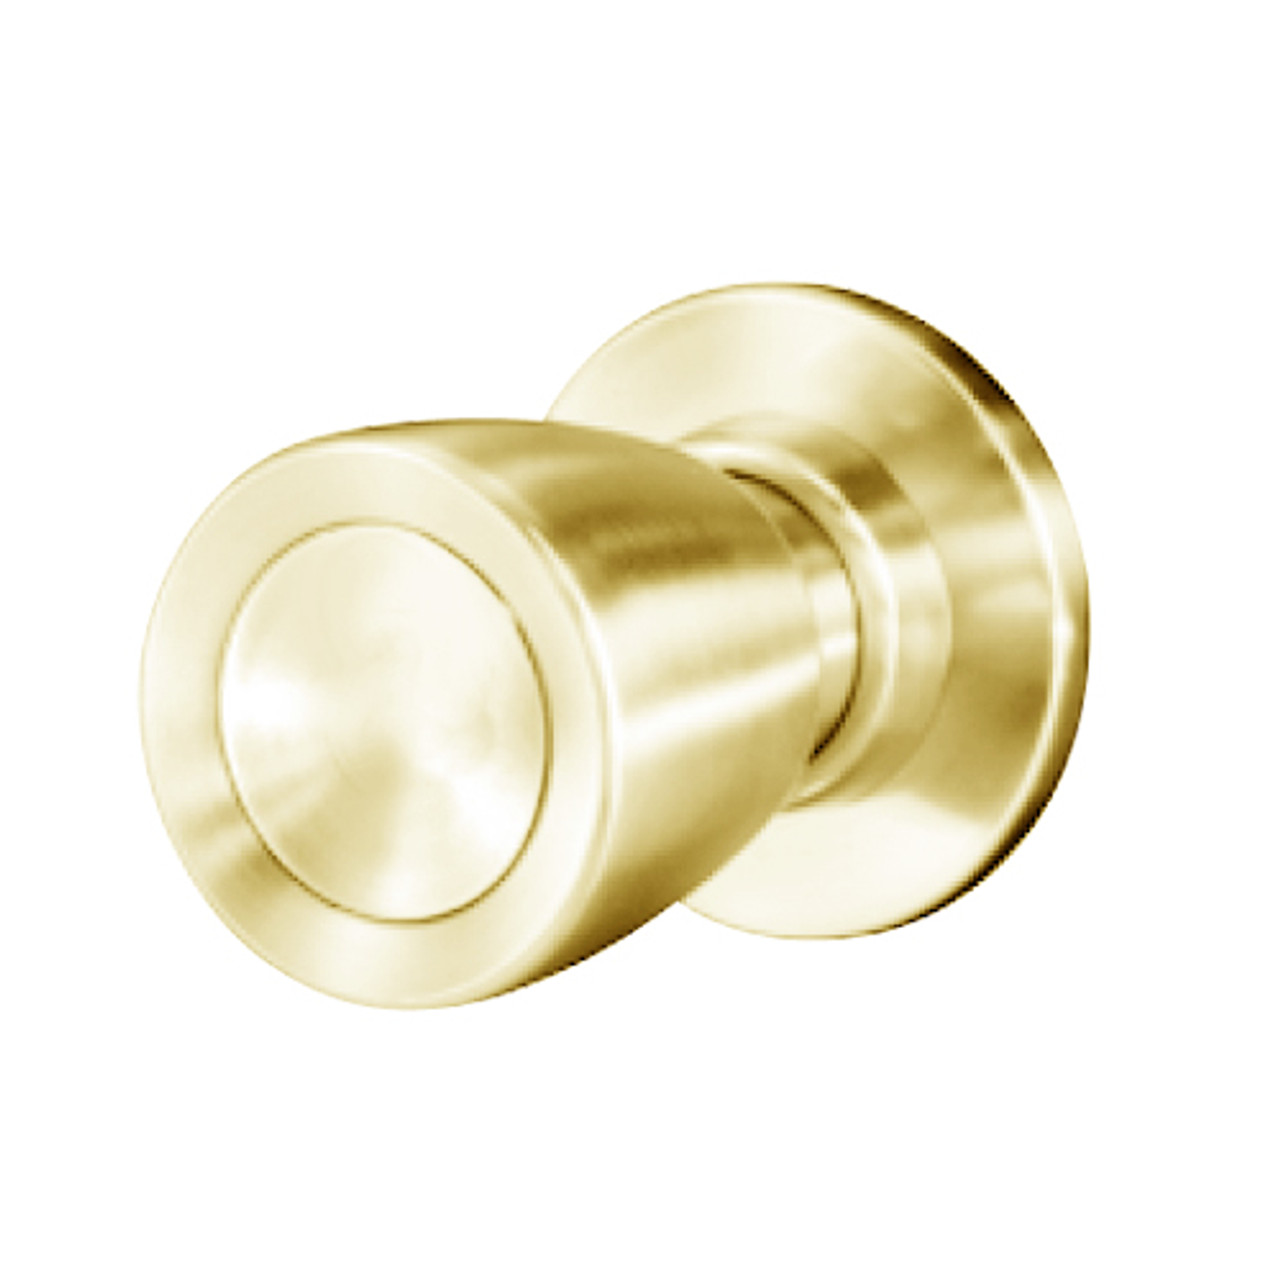 8K30Y6CS3605 Best 8K Series Exit Heavy Duty Cylindrical Knob Locks with Tulip Style in Bright Brass